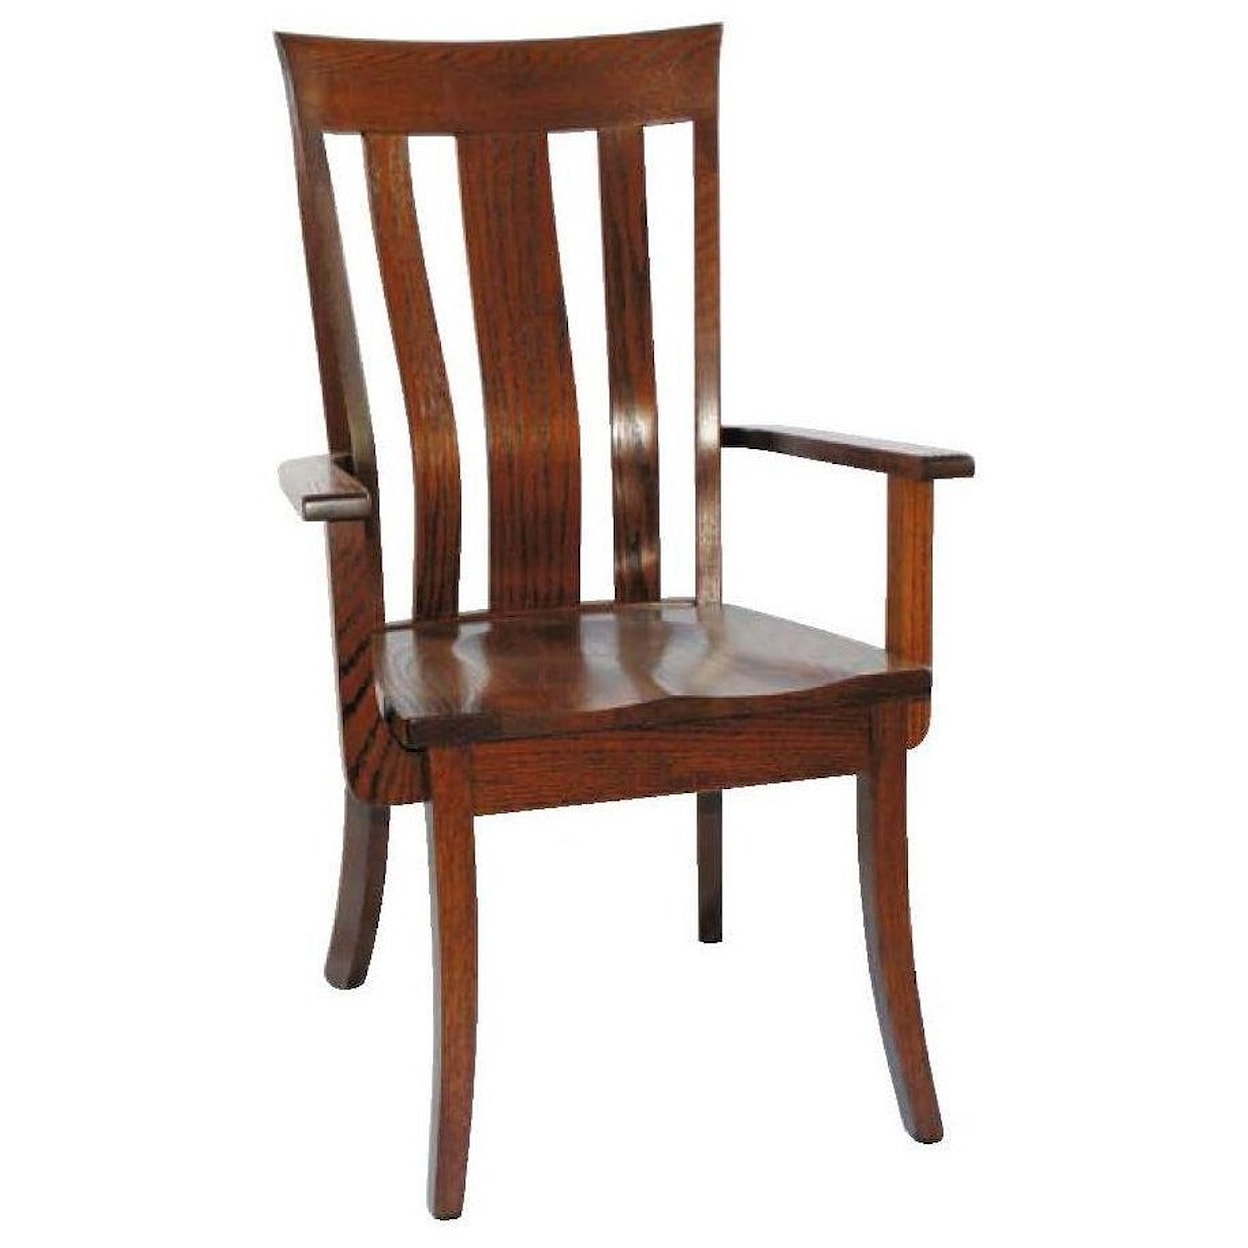 Country Comfort Woodworking McZena Arm Chair